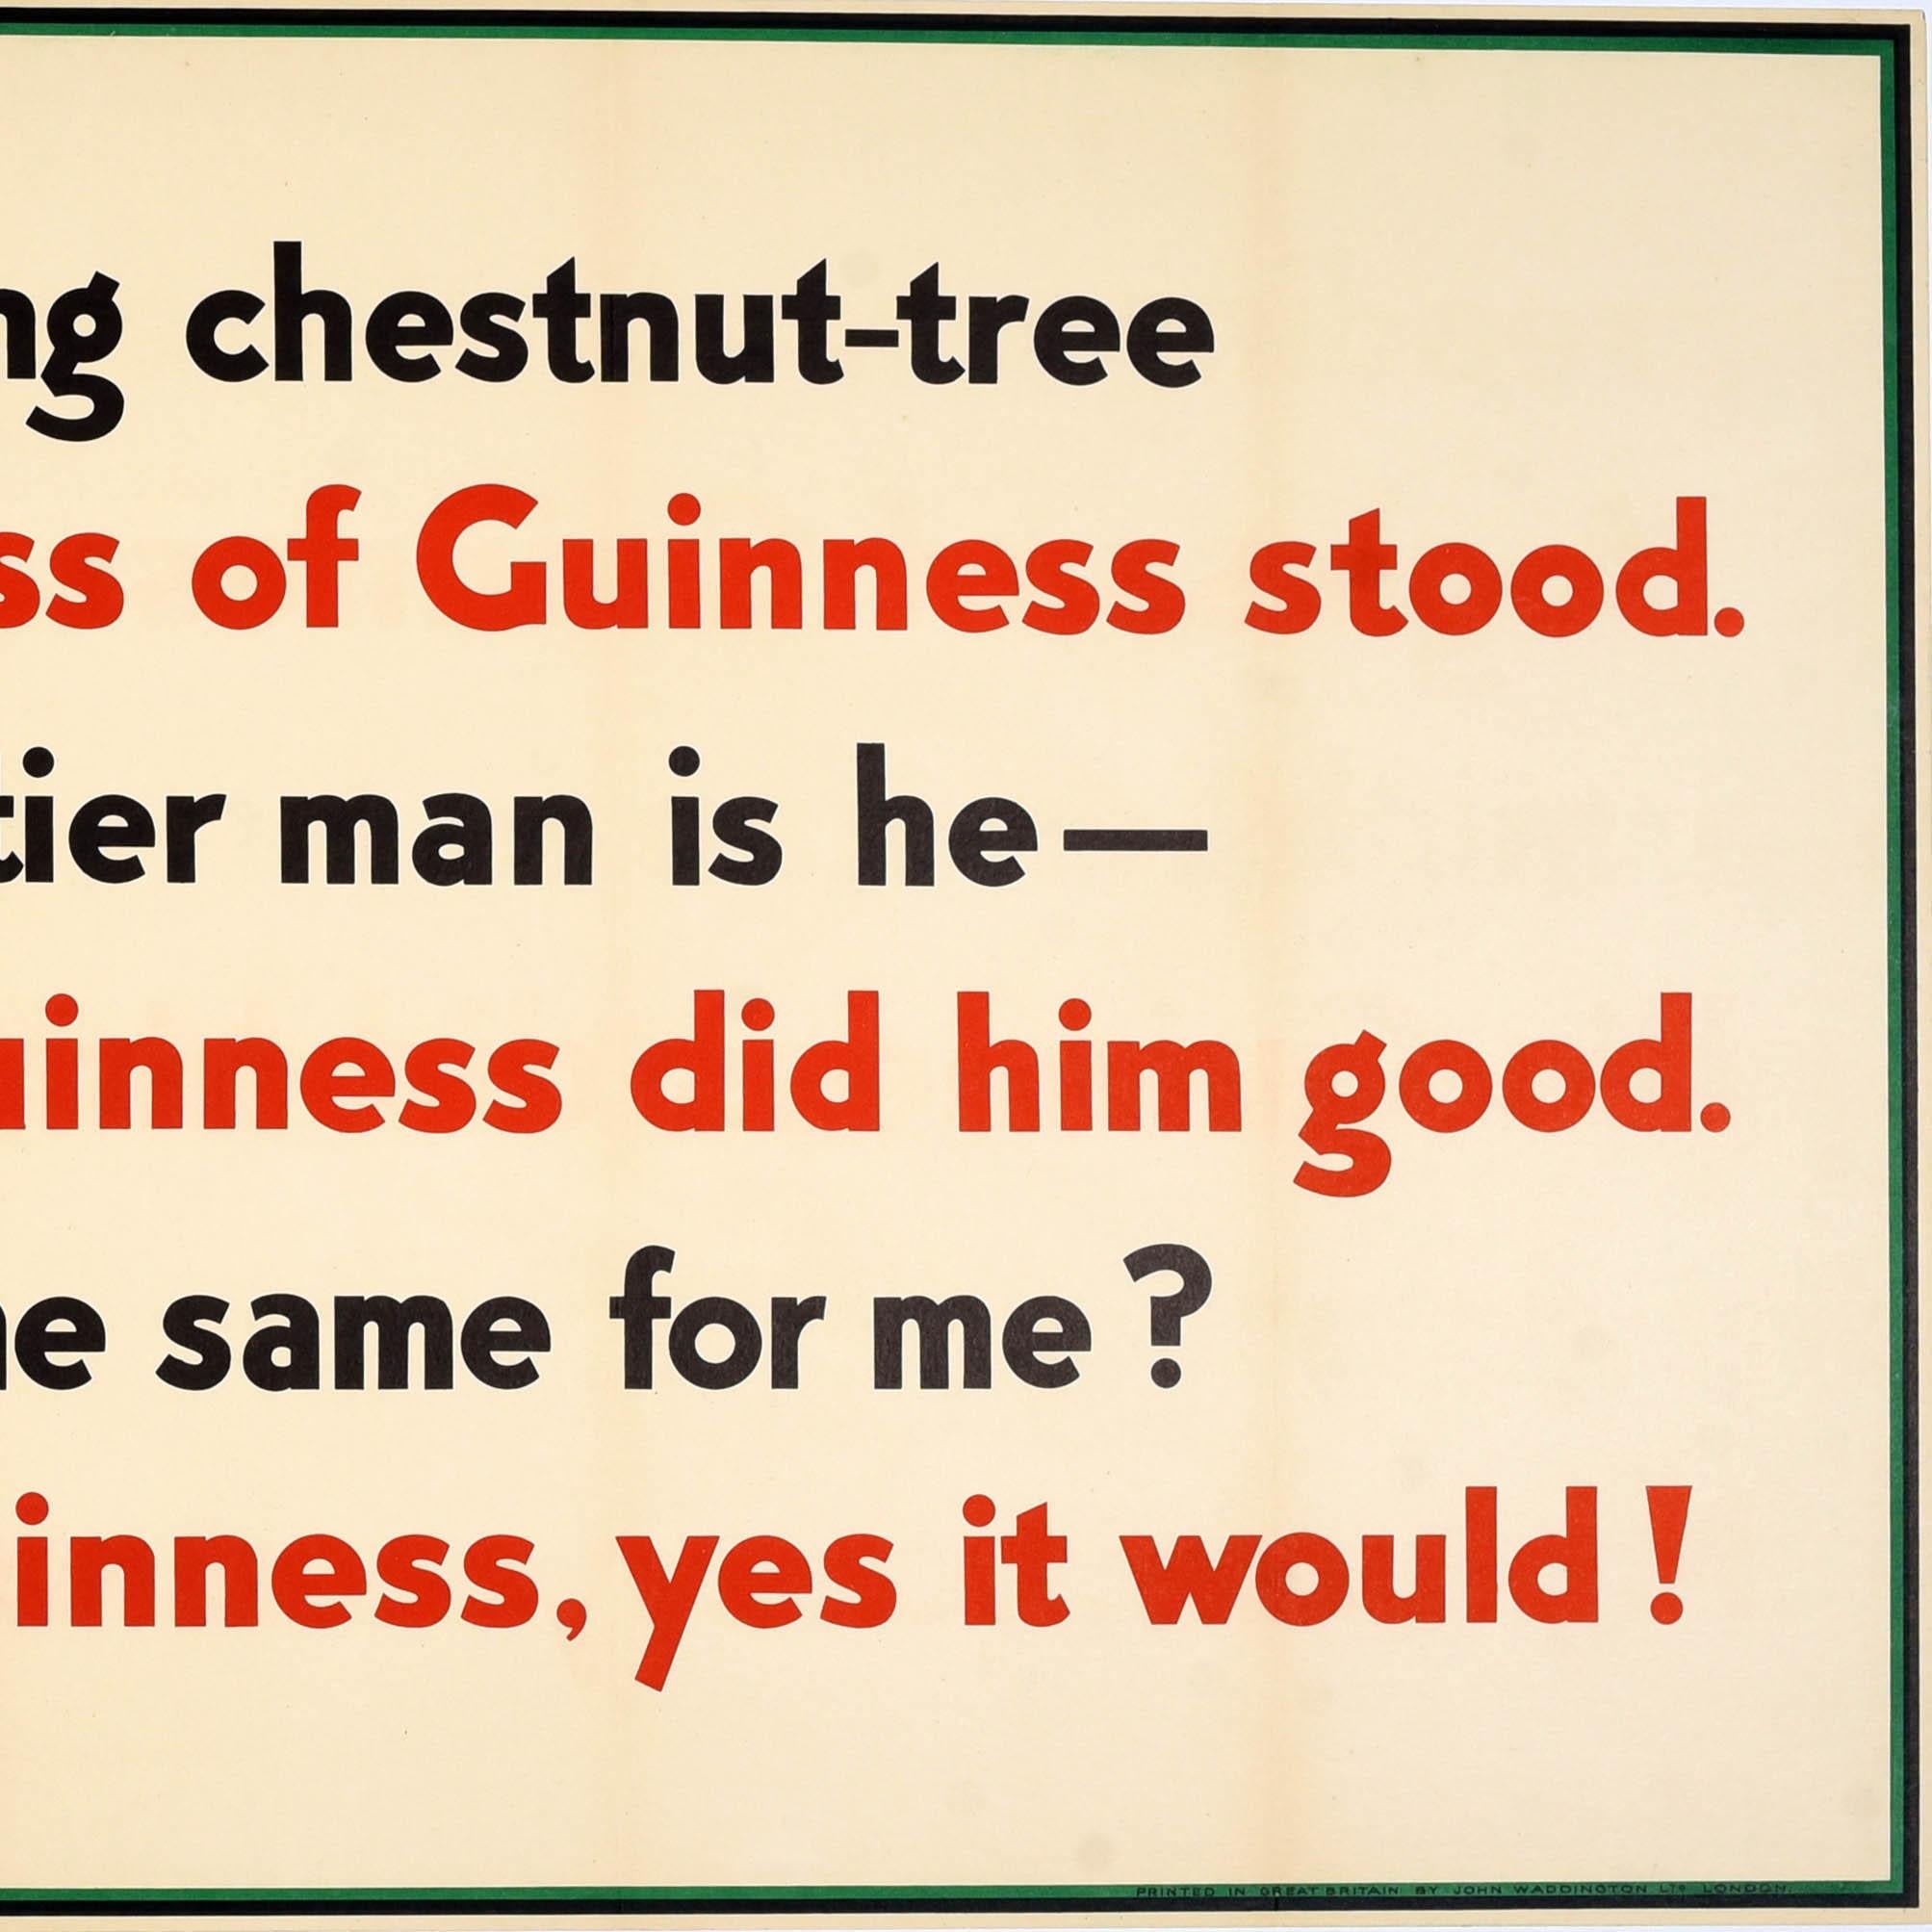 Original vintage Guinness poster - Under the spreading chestnut tree A glass of Guinness stood. The smith, a mightier man is he His Guinness did him good. And would it do the same for me? My Guinness, yes it would! - featuring a colourful design